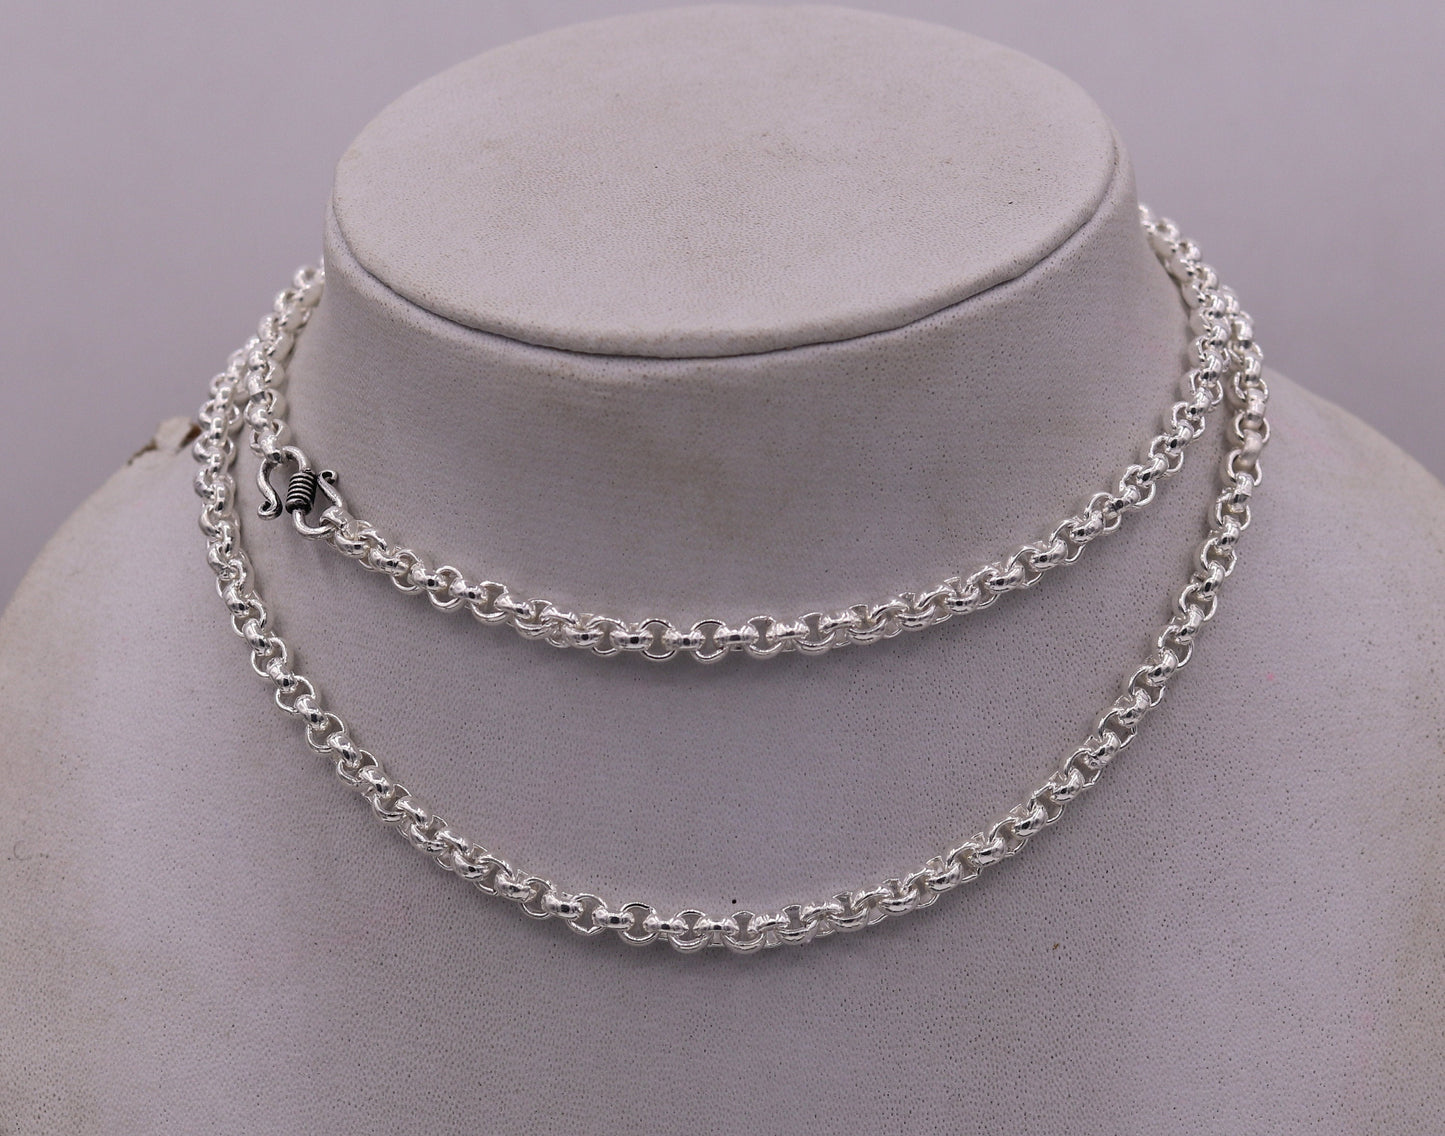 Sterling silver handmade fabulous cable link rolo chain long unisex necklace jewelry from india ch42 - TRIBAL ORNAMENTS